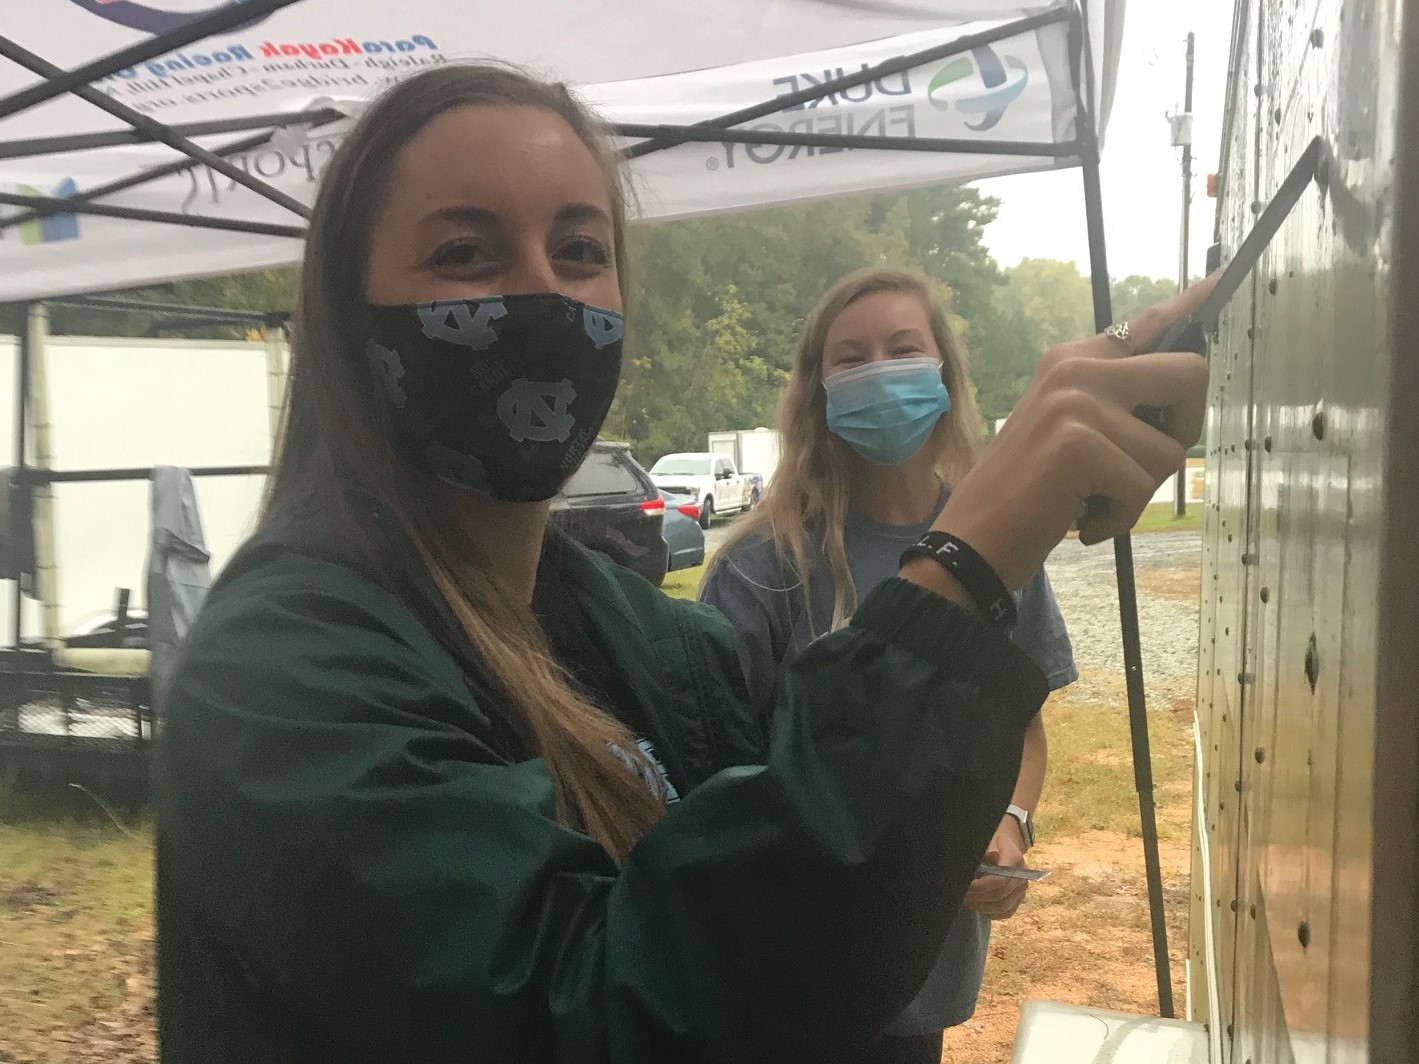 2 female college students using scrapers to remove decals off Bridge 2 Sports trailer. Both are wearing masks and looking at the camera.